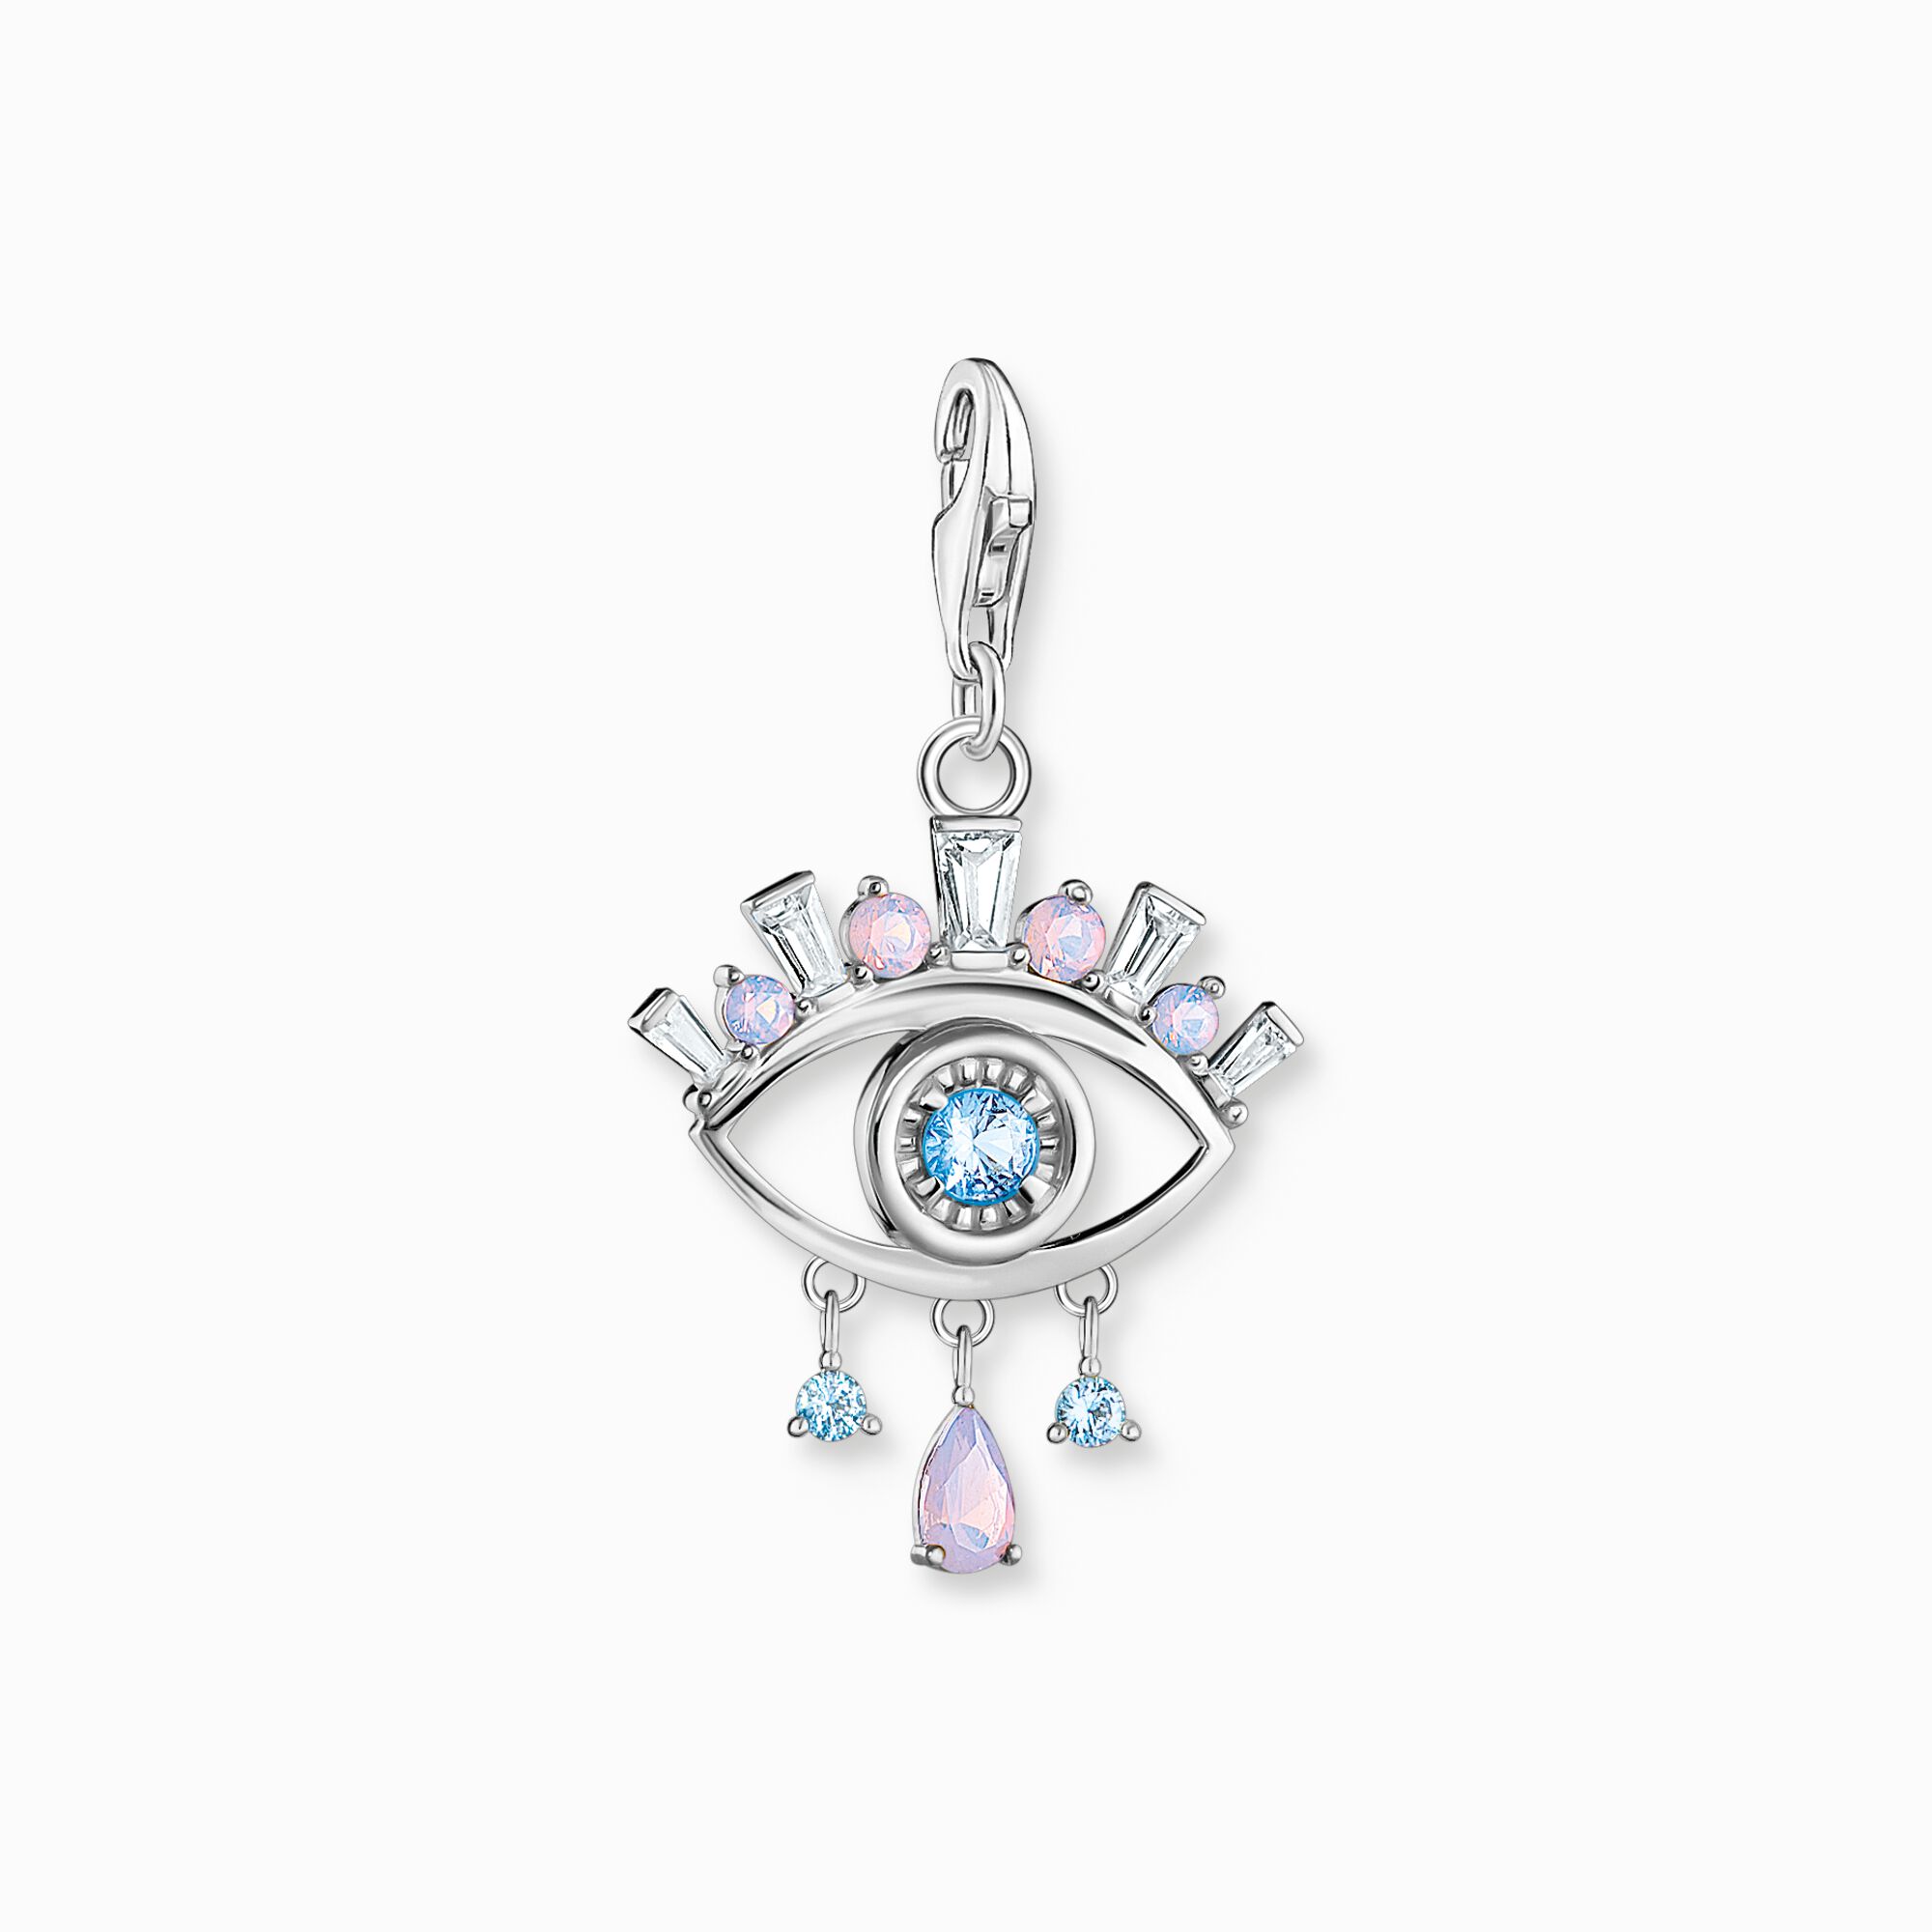 Silver charm pendant Nazar&#39;s eye with blue stones from the Charm Club collection in the THOMAS SABO online store